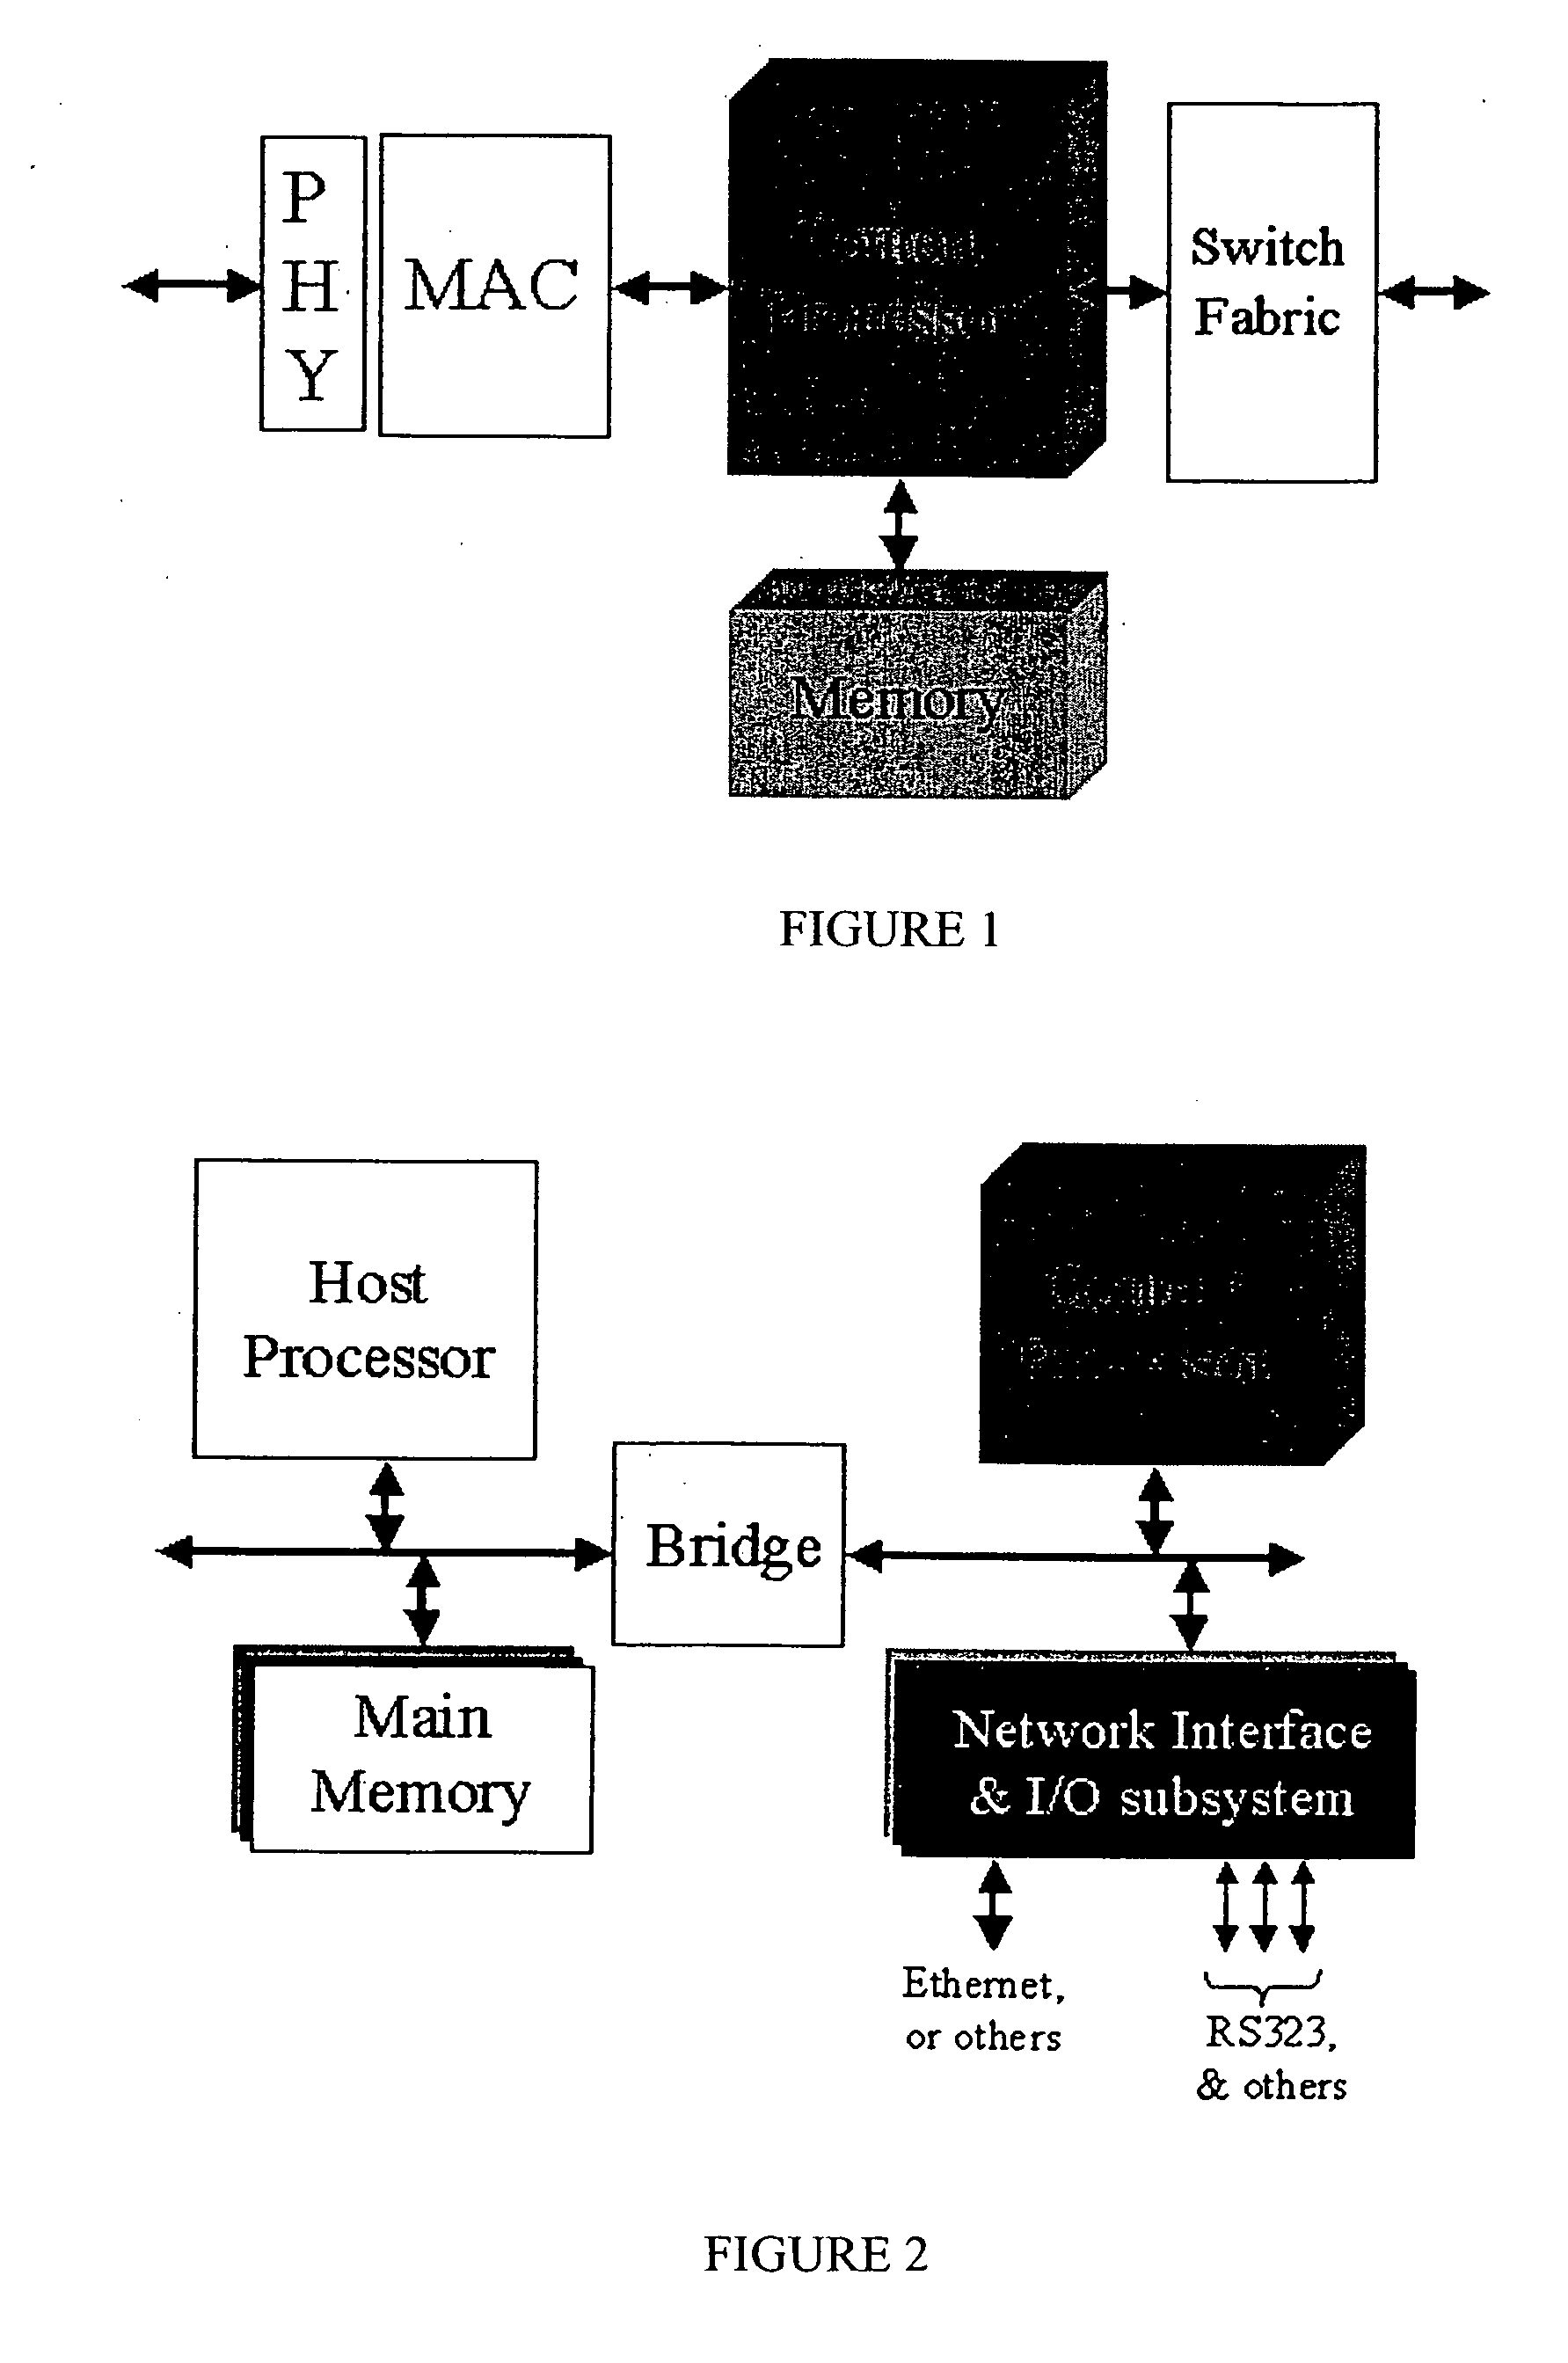 Network content processor including packet engine